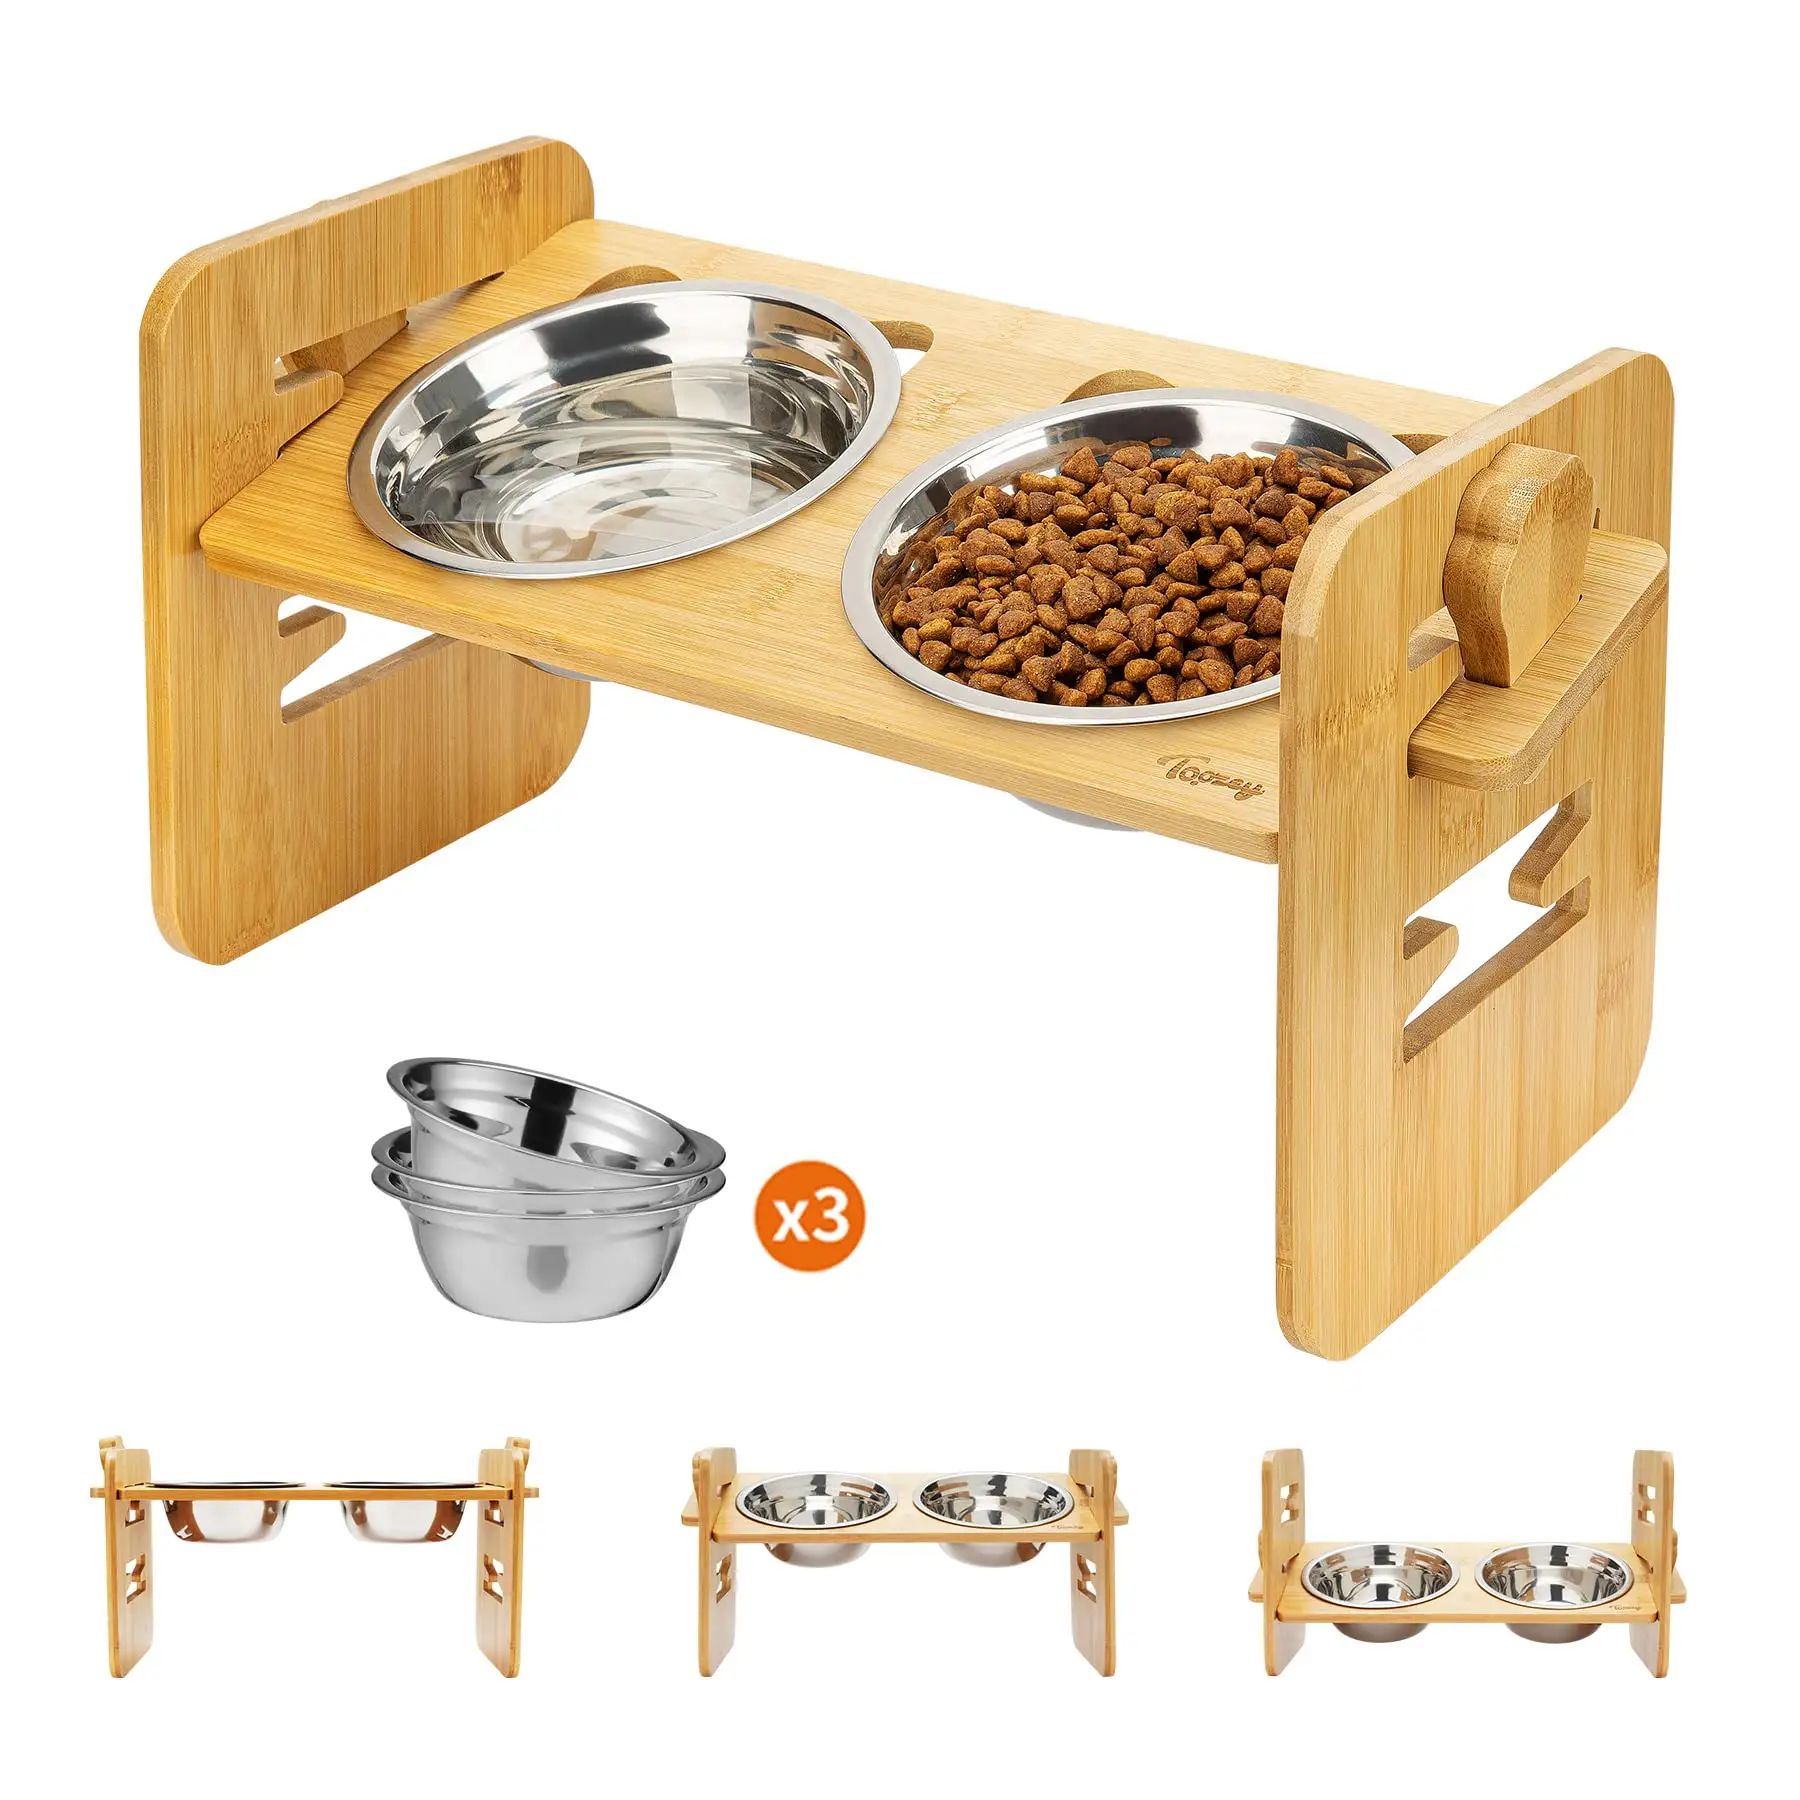 HOSTK Bamboo Elevated Cat Bowls 6 Adjustable Heights Raised Dog Bowl Stand with 3 Stainless Steel Dog Food and Water Bowls